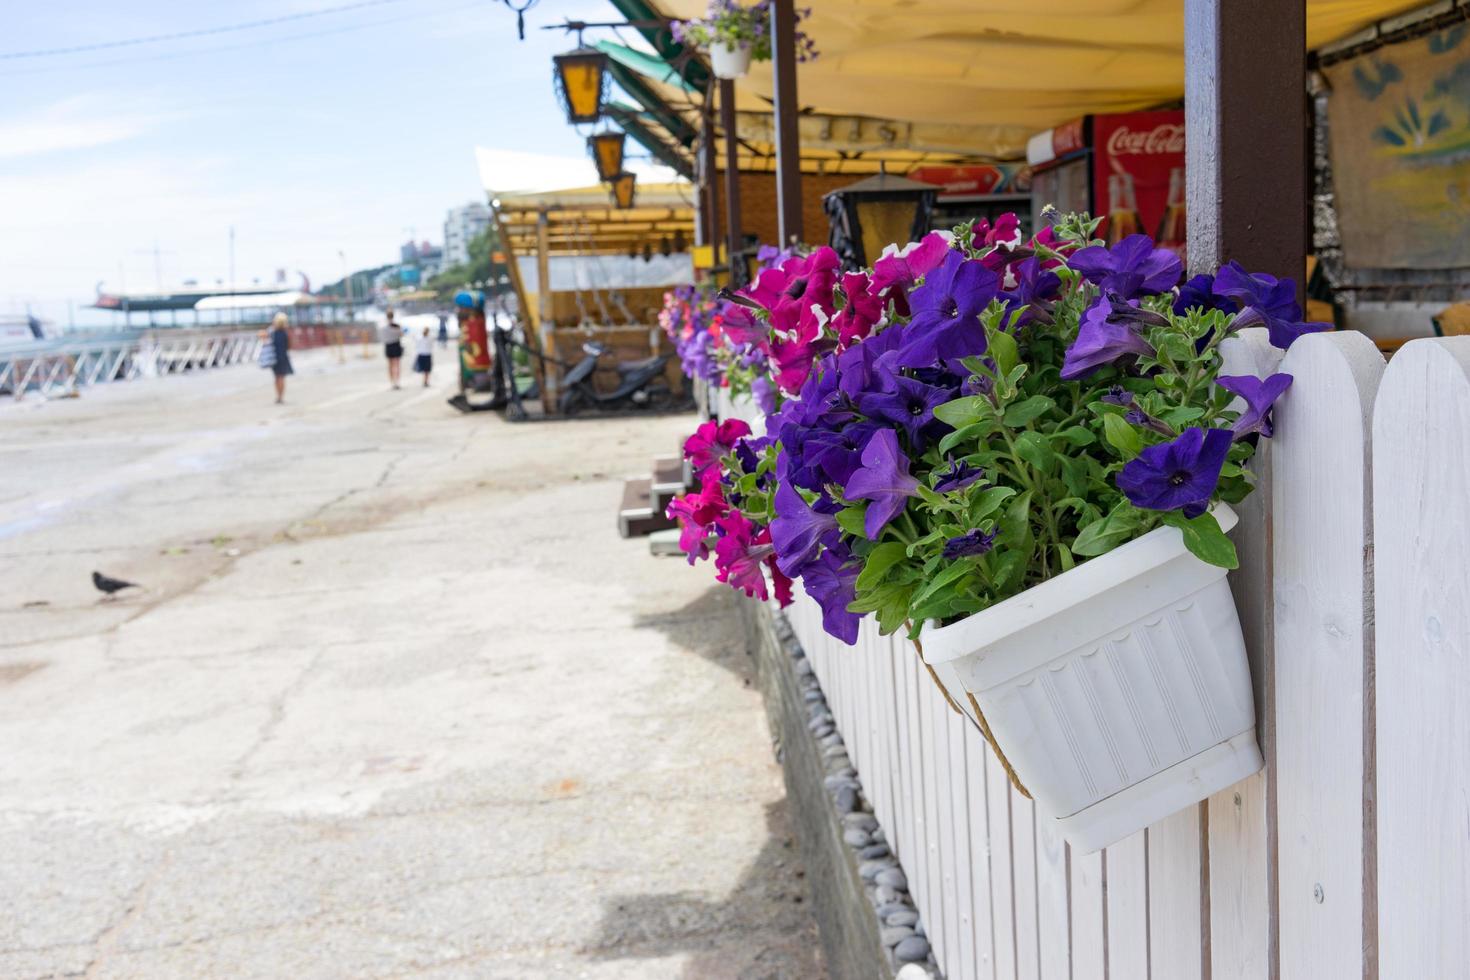 Colorful plants on a wooden fence at a seaside beachfront boardwalk photo